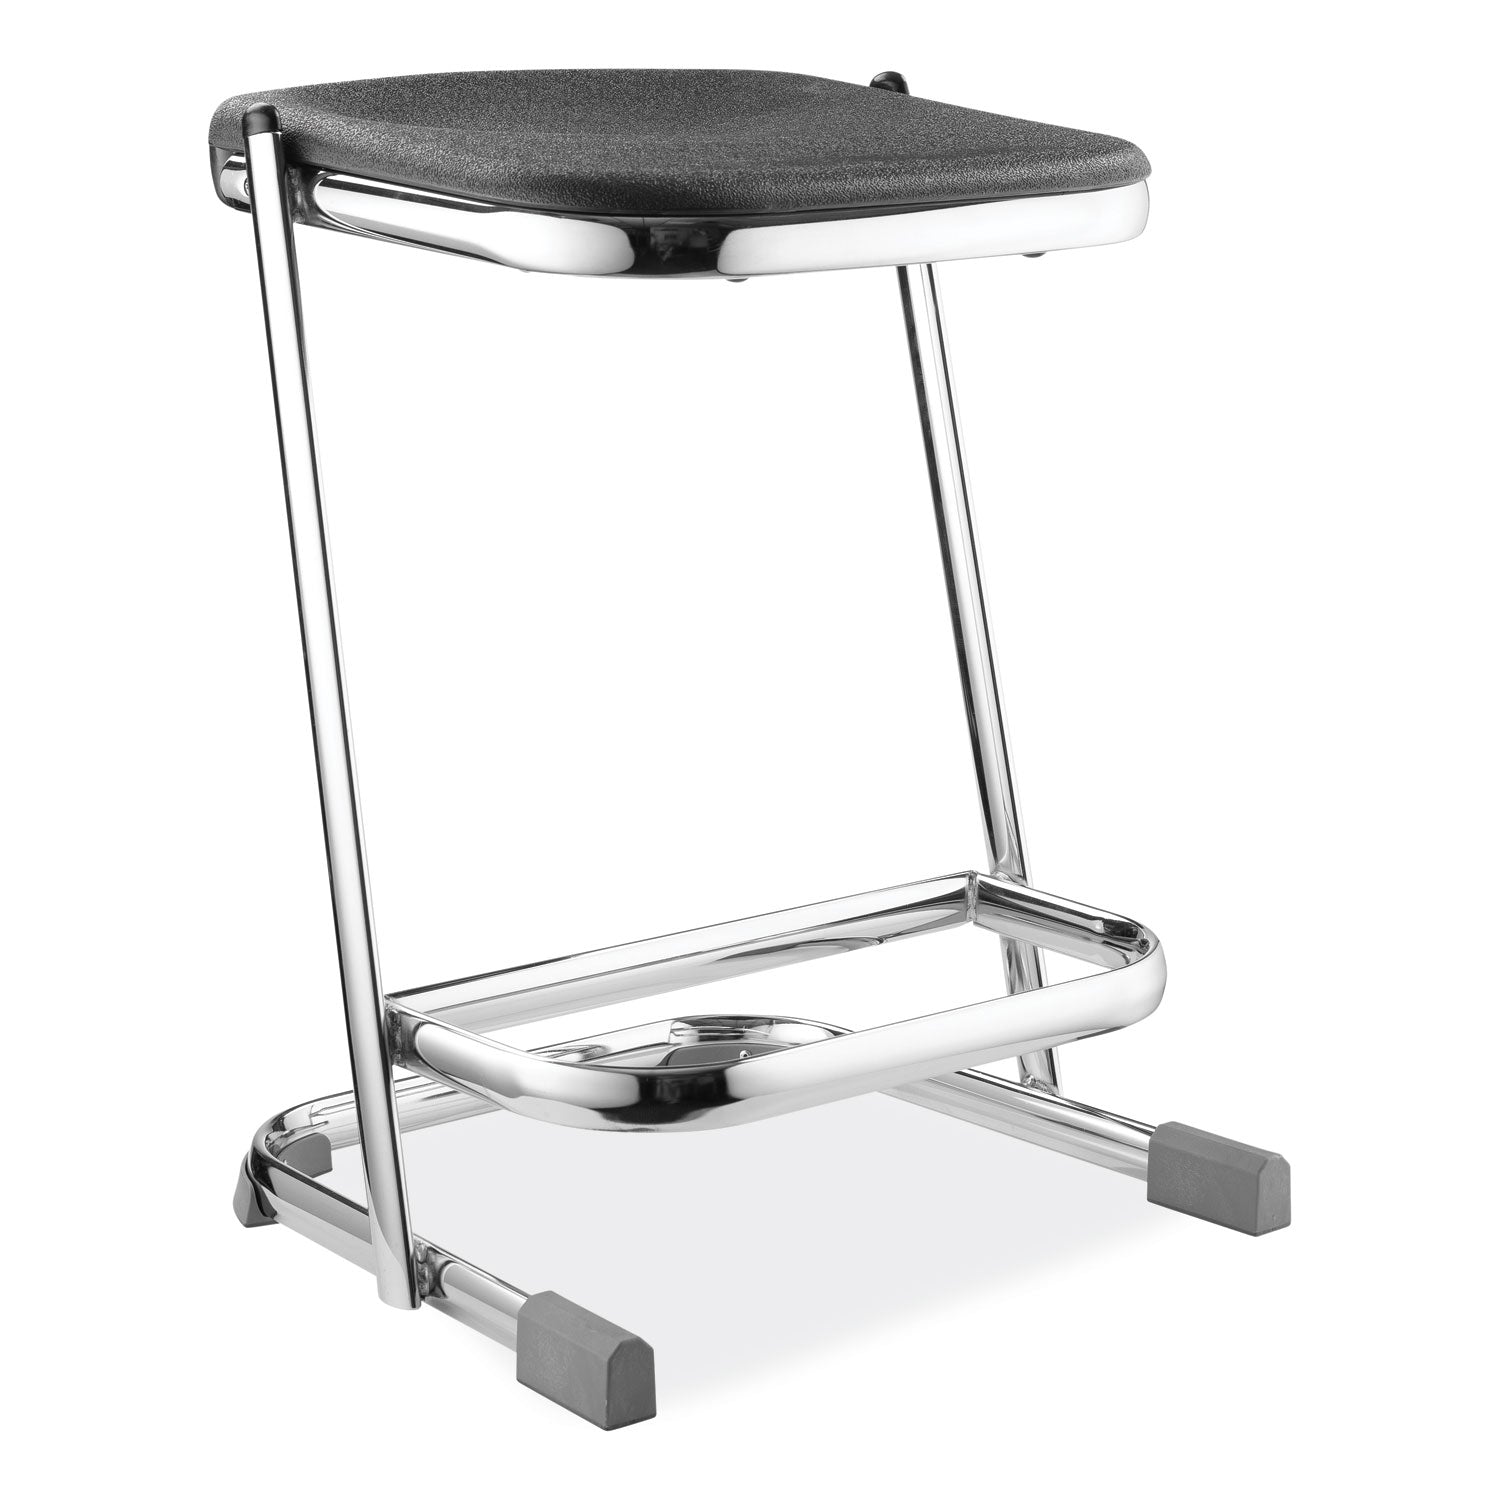 6600-series-elephant-z-stool-backless-supports-up-to-500lb-22-seat-height-black-seat-chrome-frameships-in-1-3-bus-days_nps6622 - 1